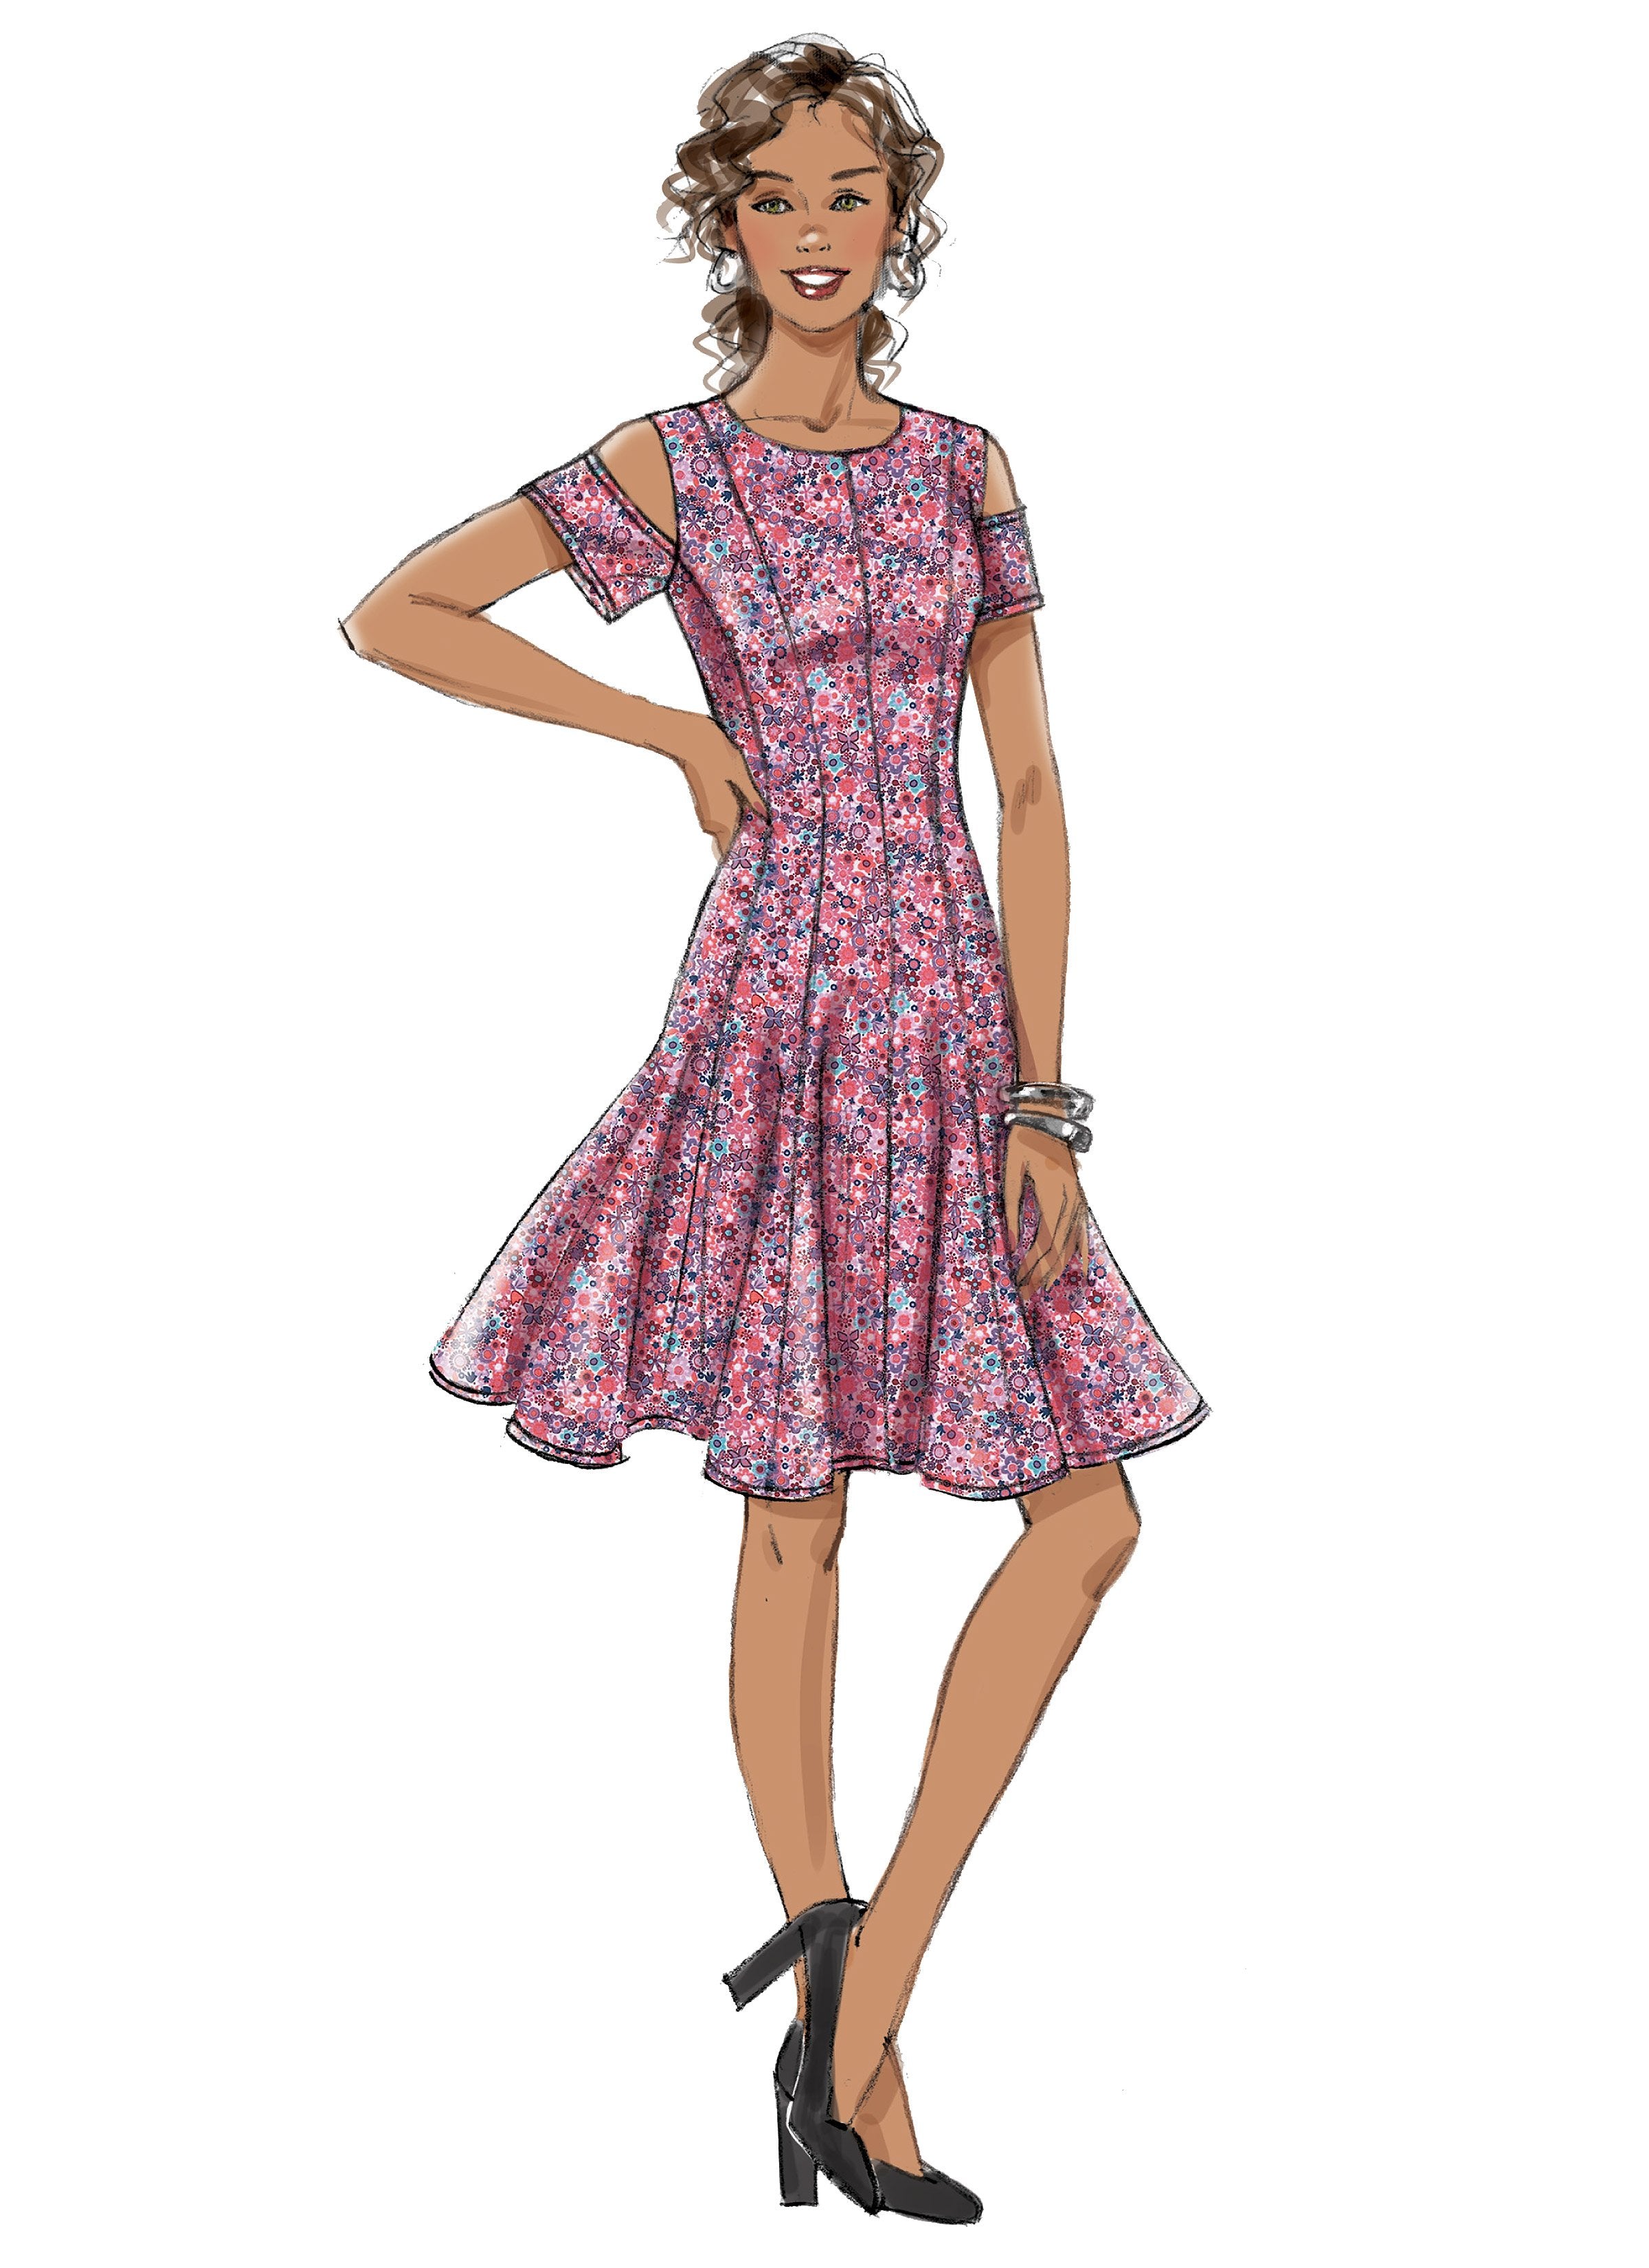 B6514 Misses'/Miss Petite Paneled Dress from Jaycotts Sewing Supplies